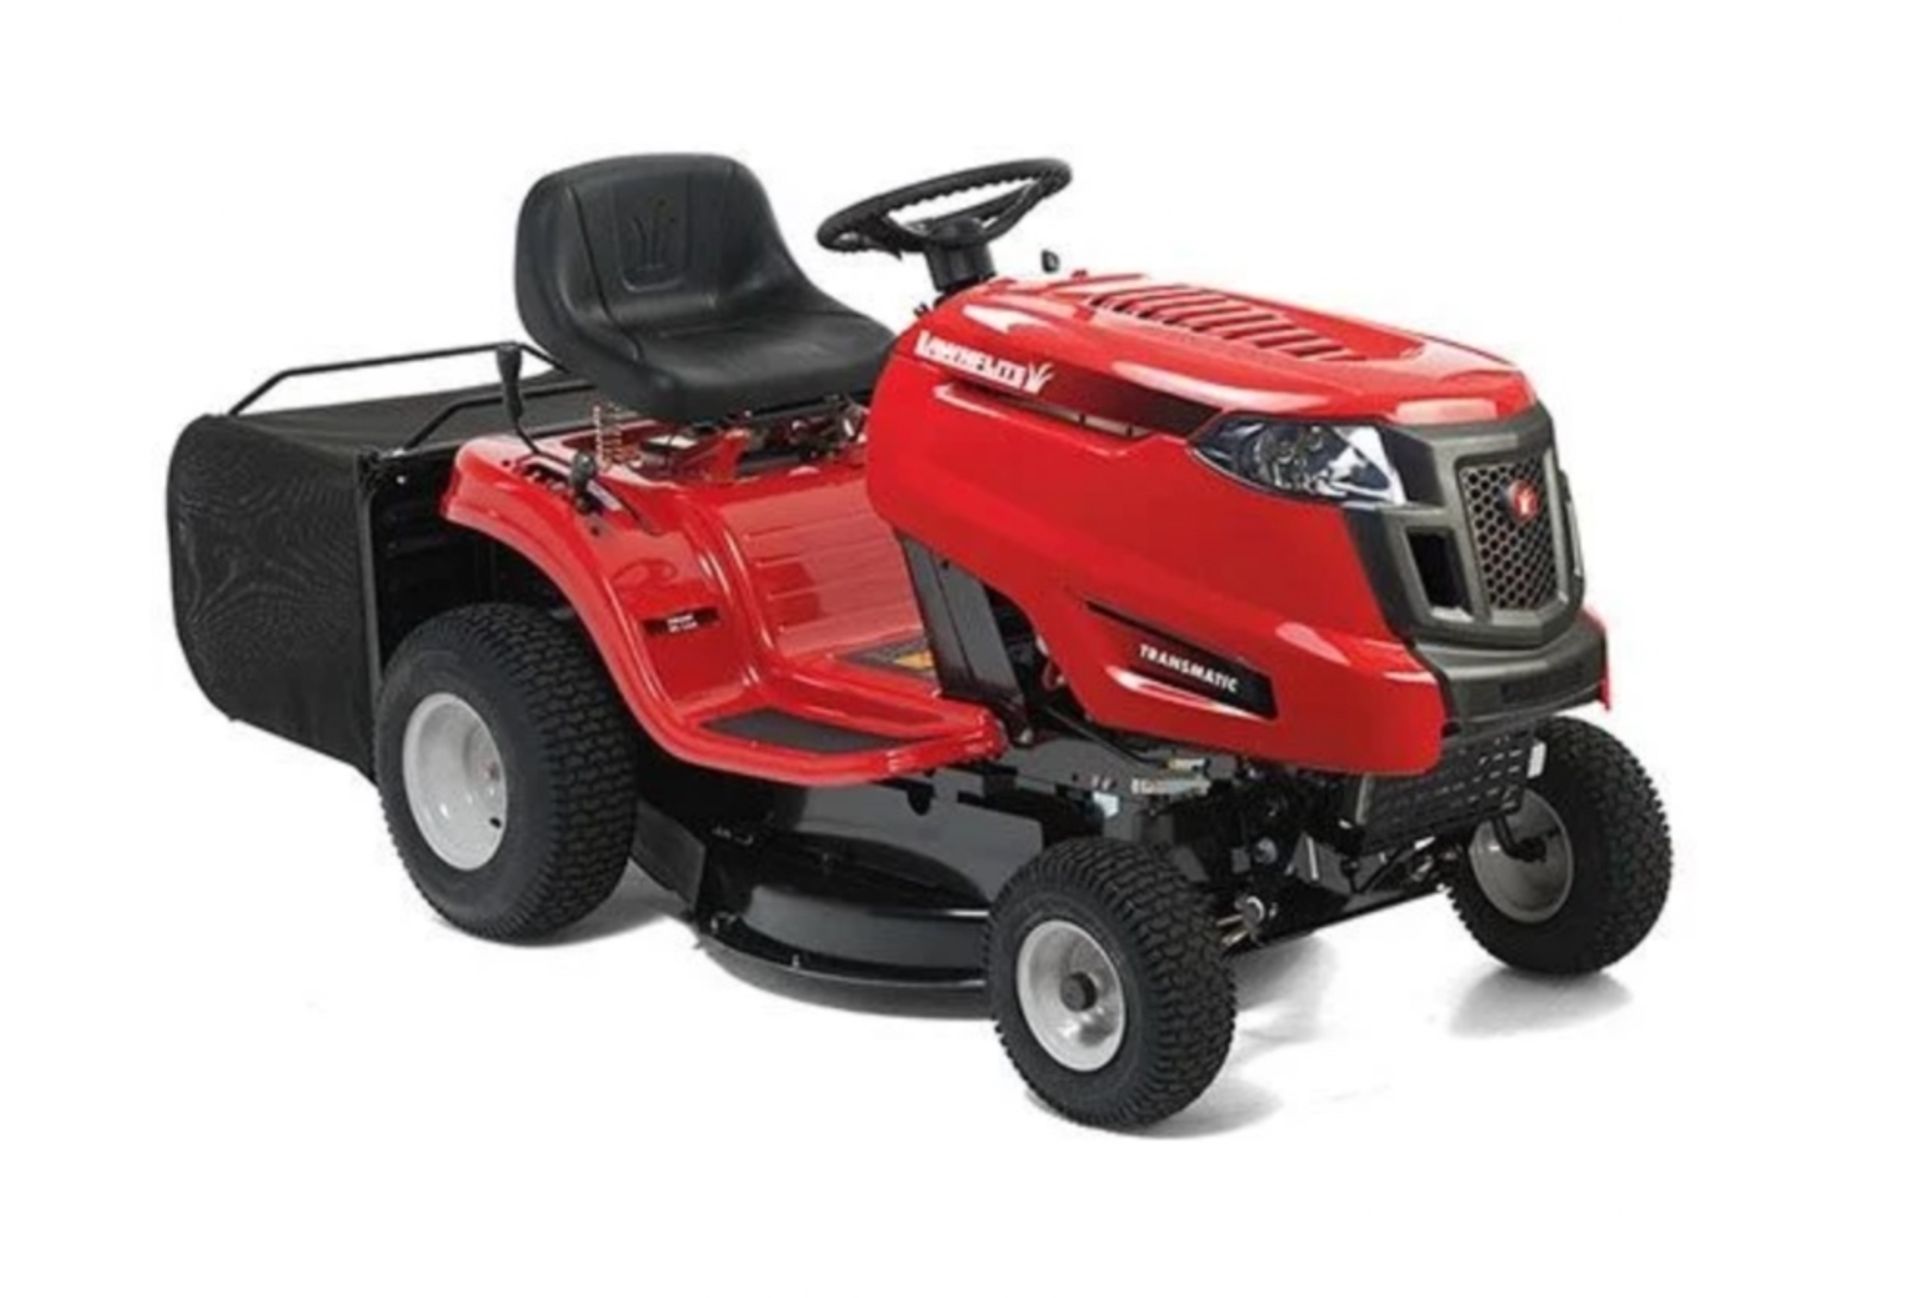 Brand New Ride on Lawn Mower Lawnflite RC125 Lawn Tractor RRP £2,499